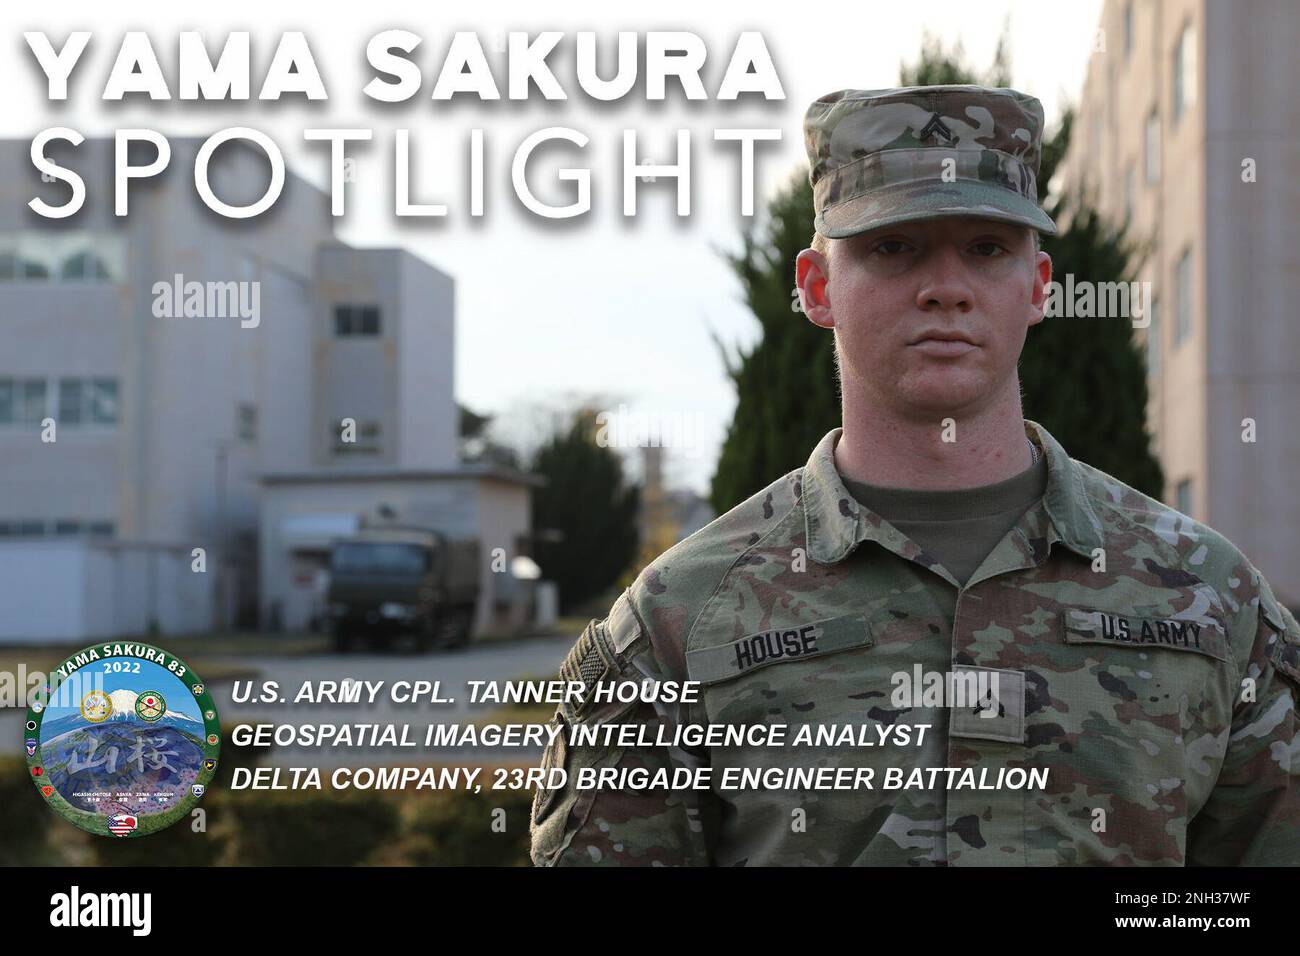 Cpl. Tanner House is a Geospatial Imagery Intelligence Analyst with Delta Company, 23rd Brigade Engineer Battalion. “Yama Sakura has been a very interesting experience for me. Building a relationship with my counterpart has been awesome. Truly is fulfilling working alongside someone who shares my passion and enjoys putting forth their best effort as well.” Stock Photo